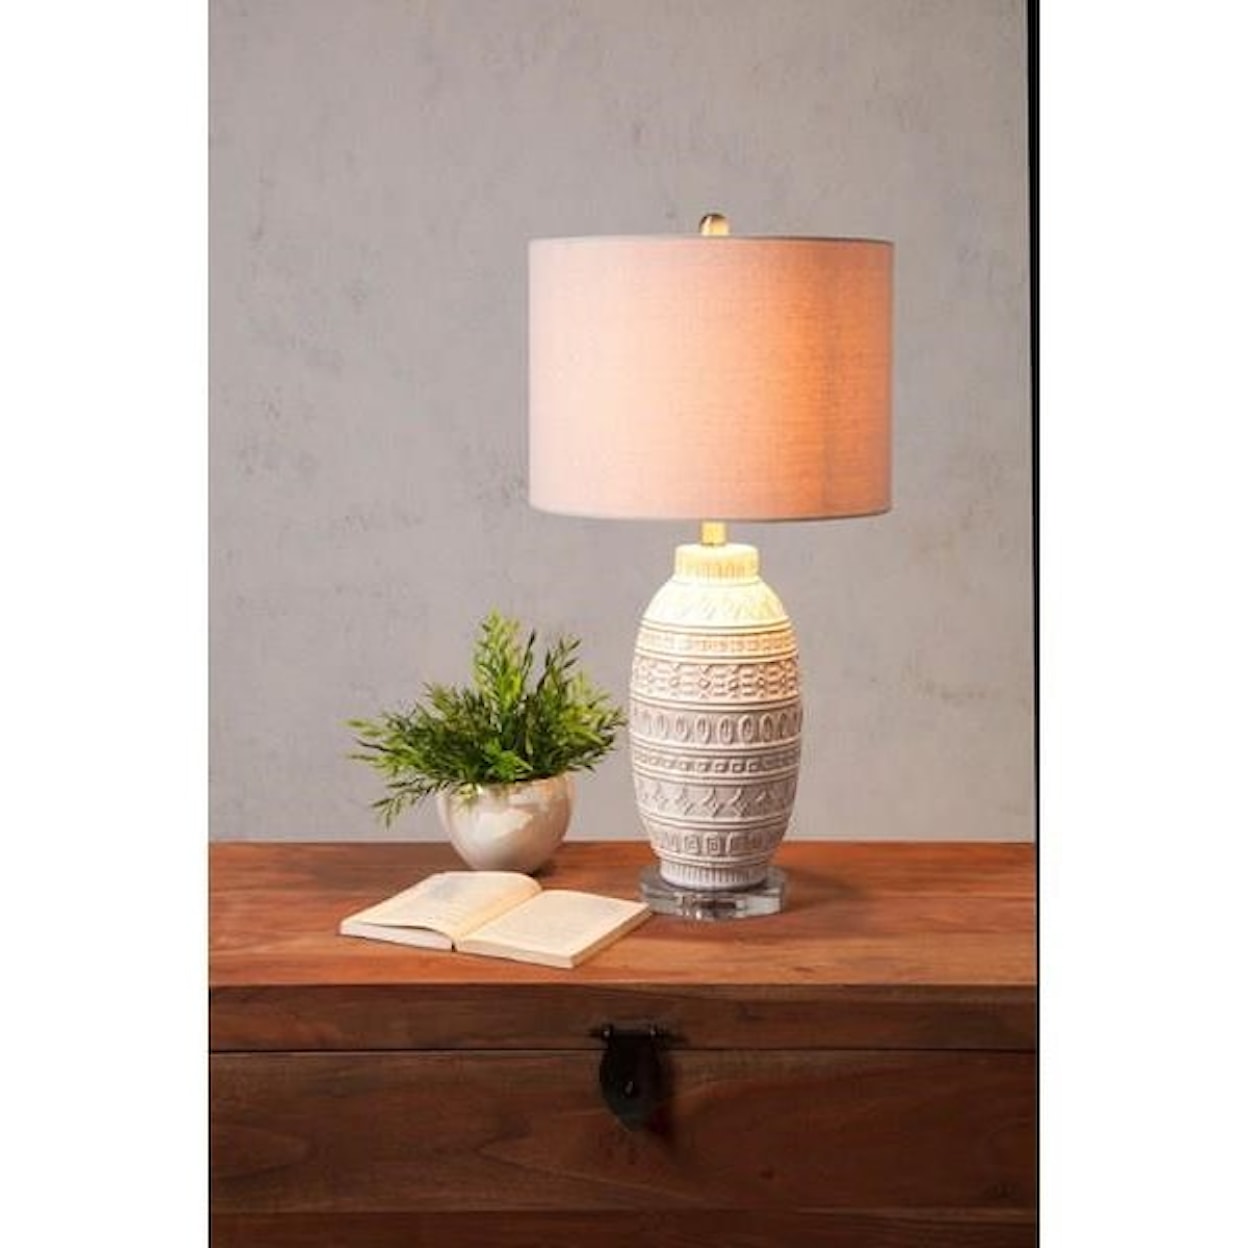 IMAX Worldwide Home Lamps Addonis Ceramic Table Lamp